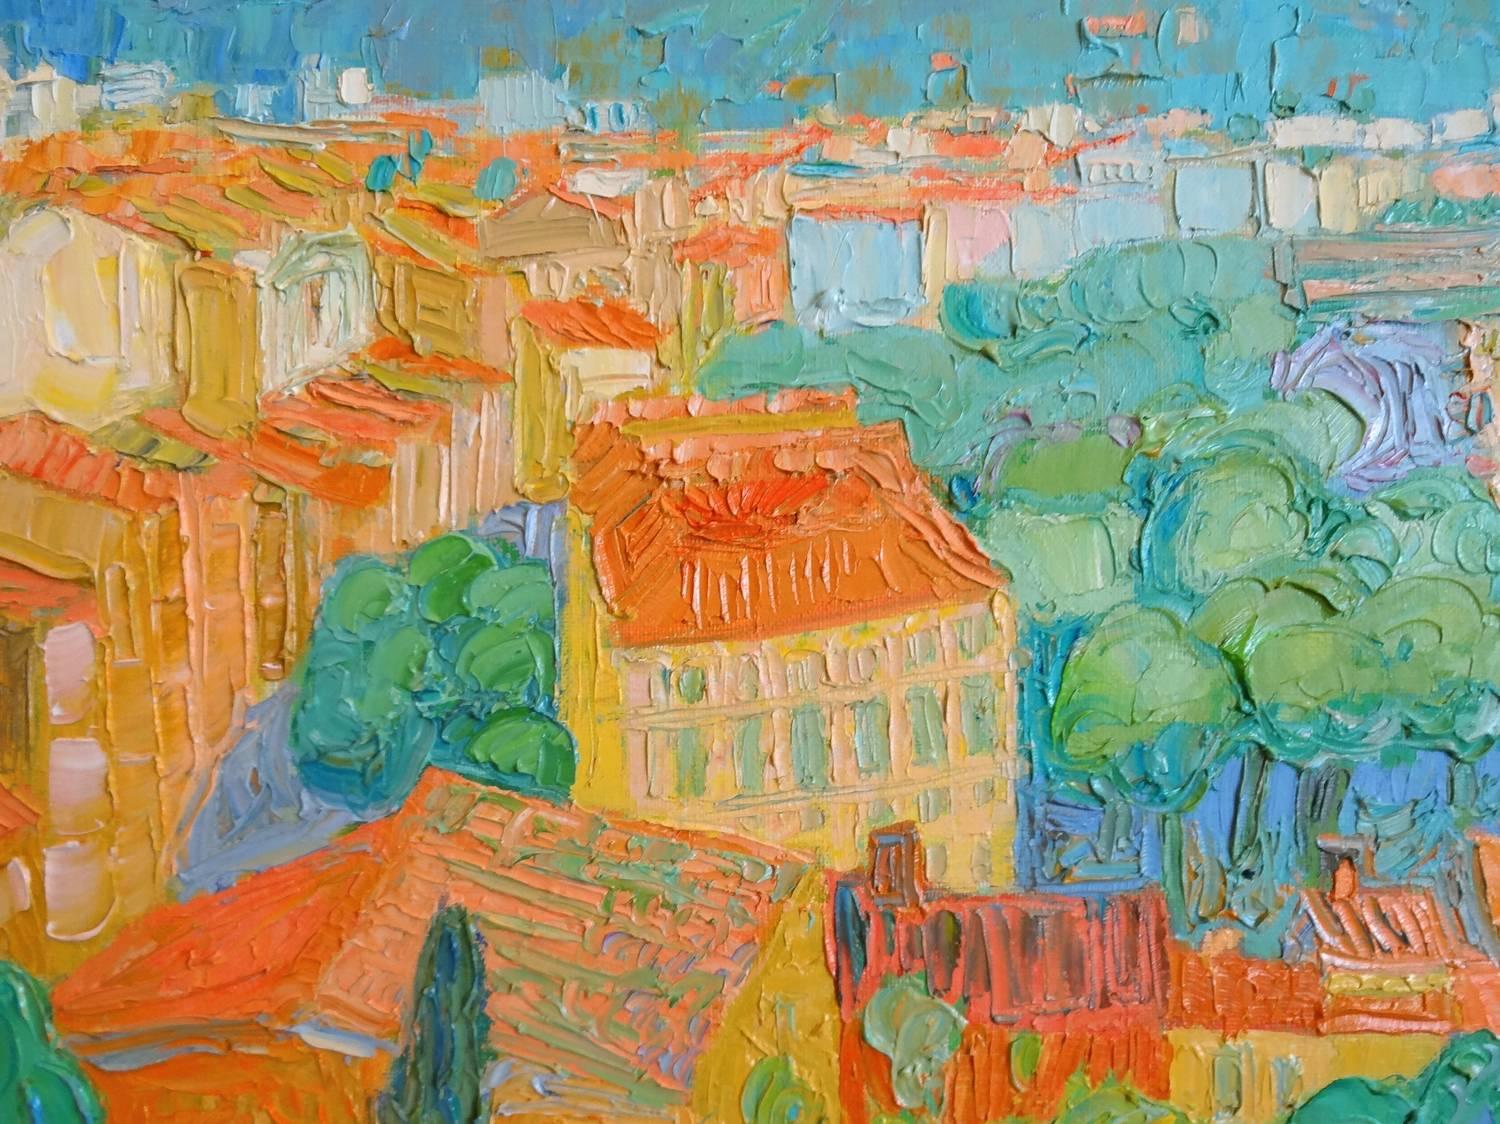 Cannes in the Sun (Cannes au Soleil) - Impressionist Painting by Daniel Couthures